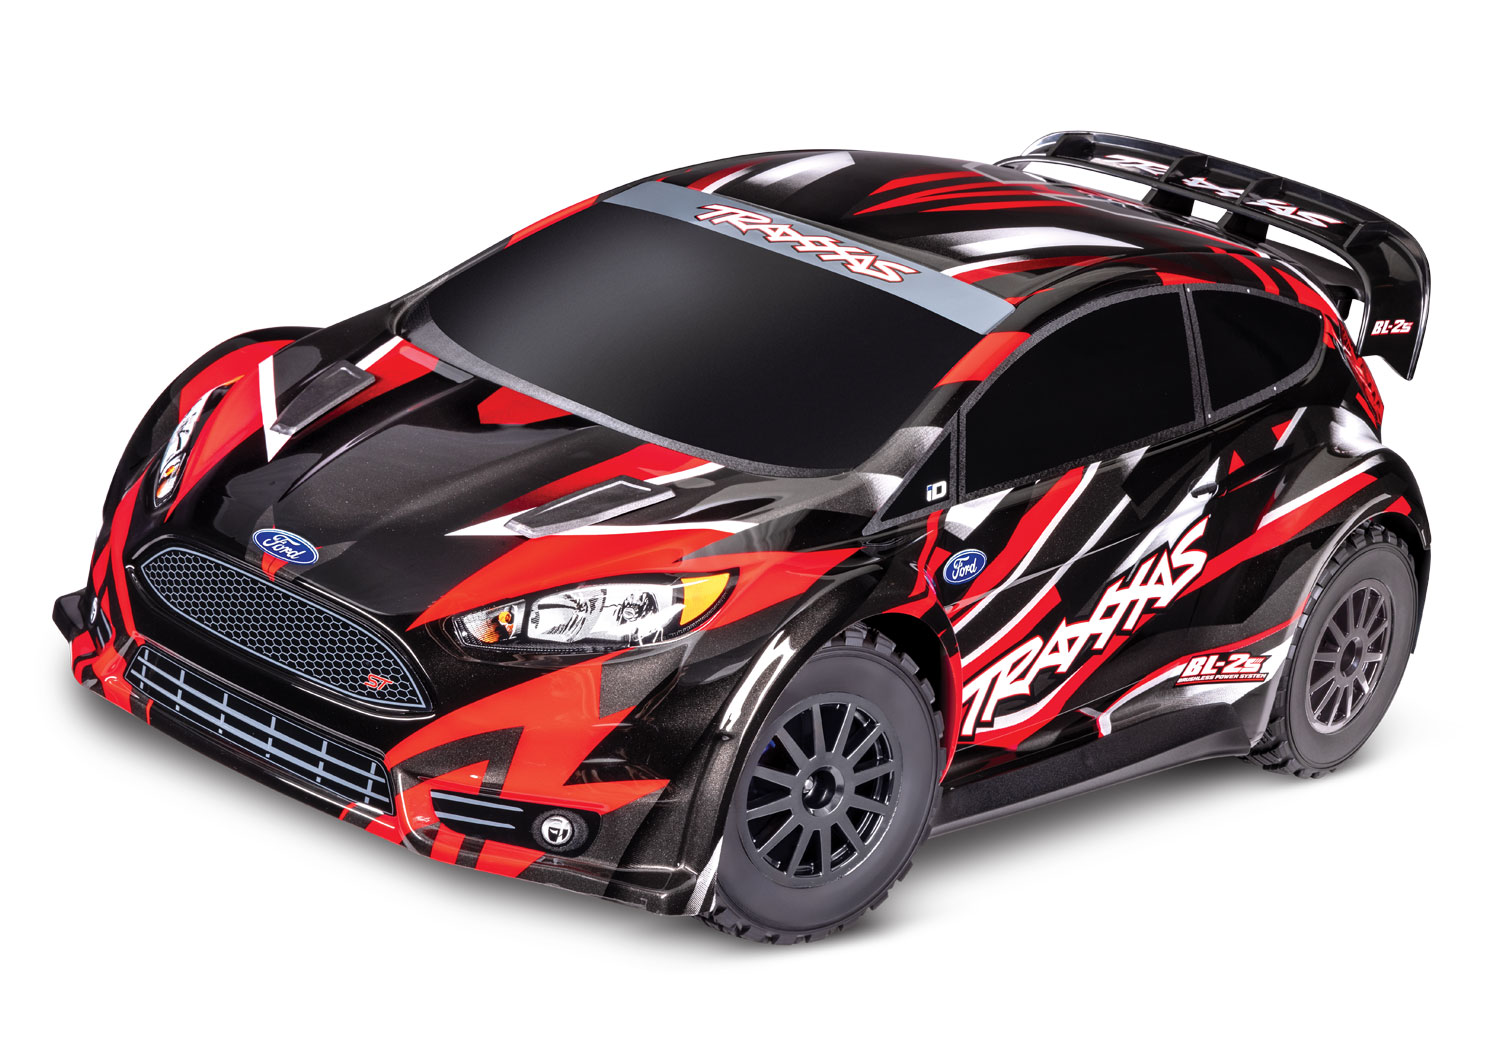 PACK ECO FORD FIESTA ST RALLY BRUSHLESS BL-2S ROUGE LIPO 2S 5800 MAH CHARGEUR TRAXXAS SAC OFFERT